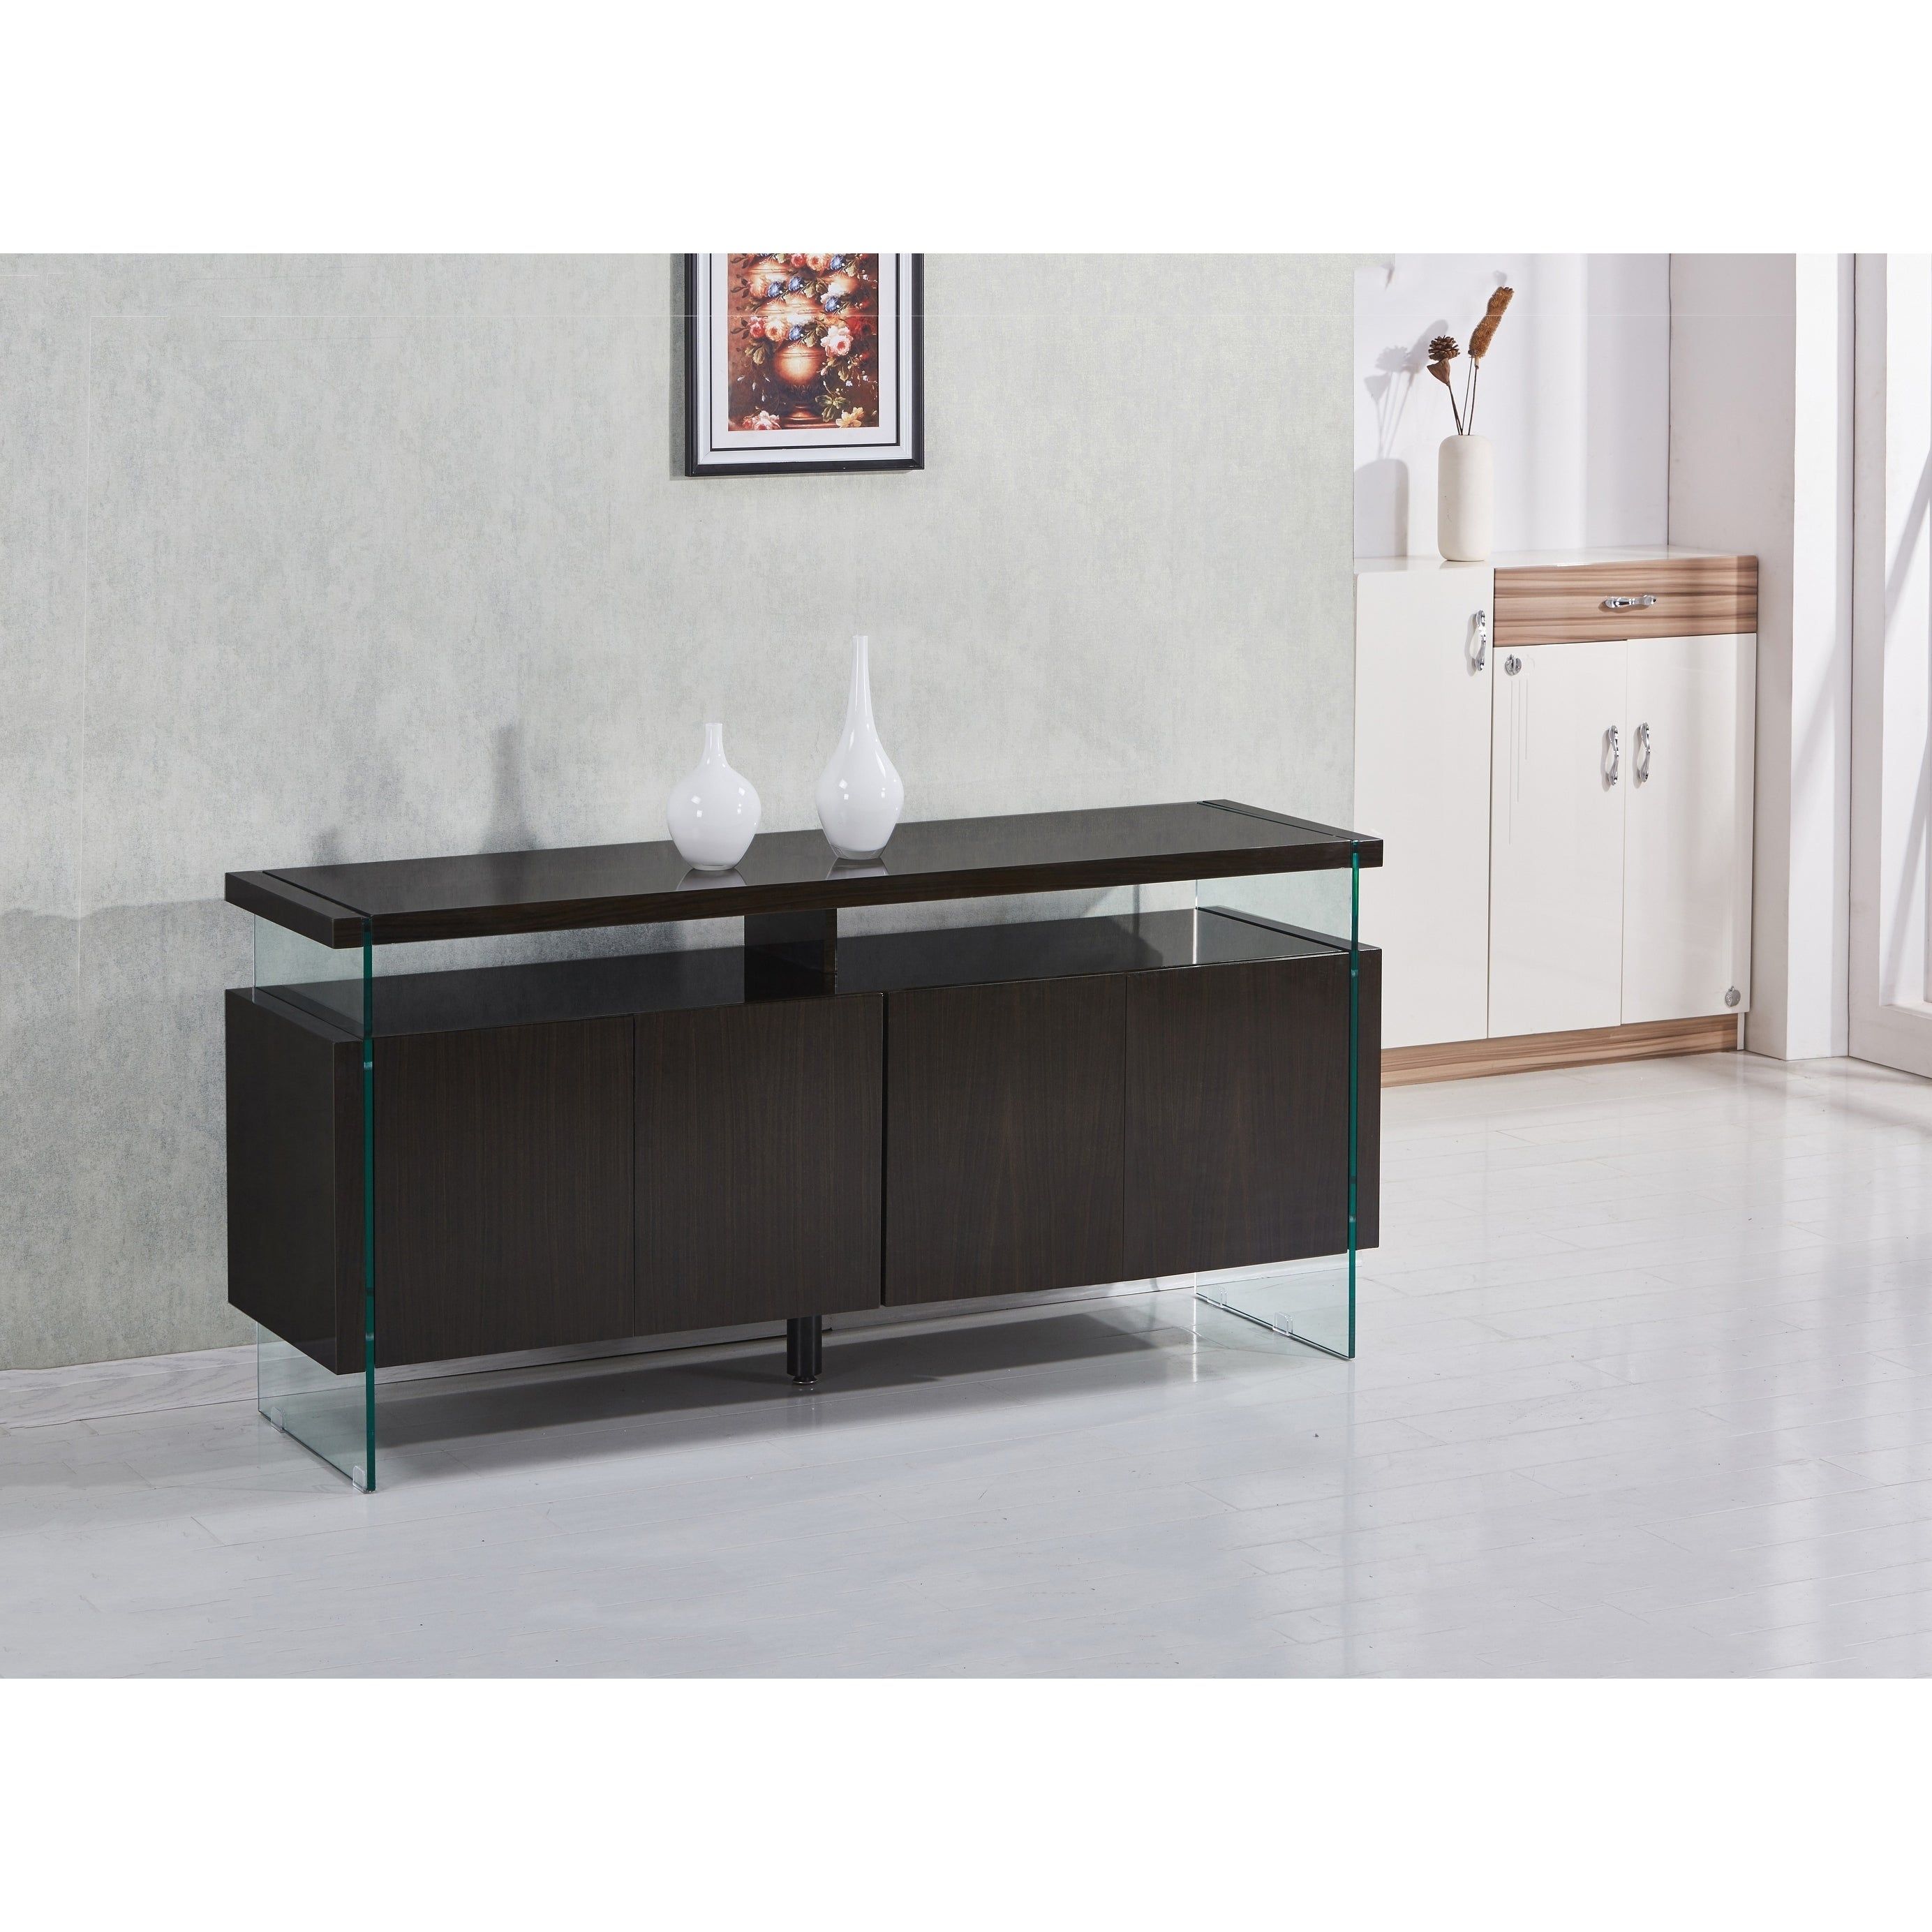 Best Quality Furniture 4 Door Lacquer Buffet Server For 4 Door Lacquer Buffets (Photo 3 of 30)